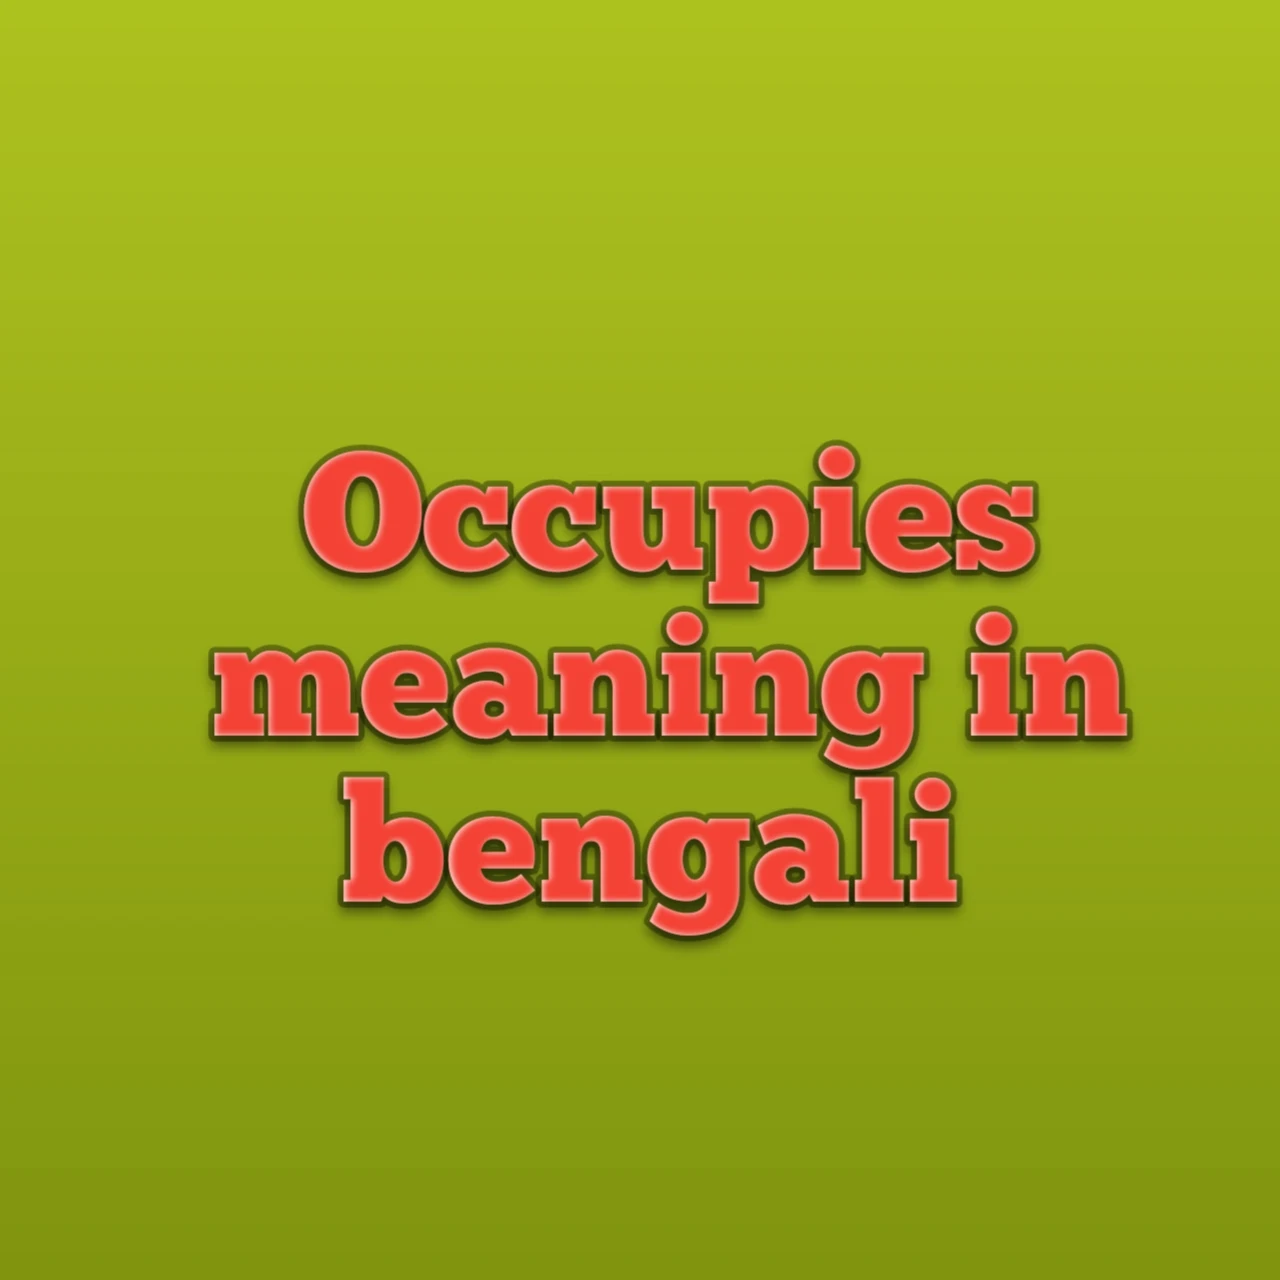 occupies meaning in bengali, occupies means, occupies meaning